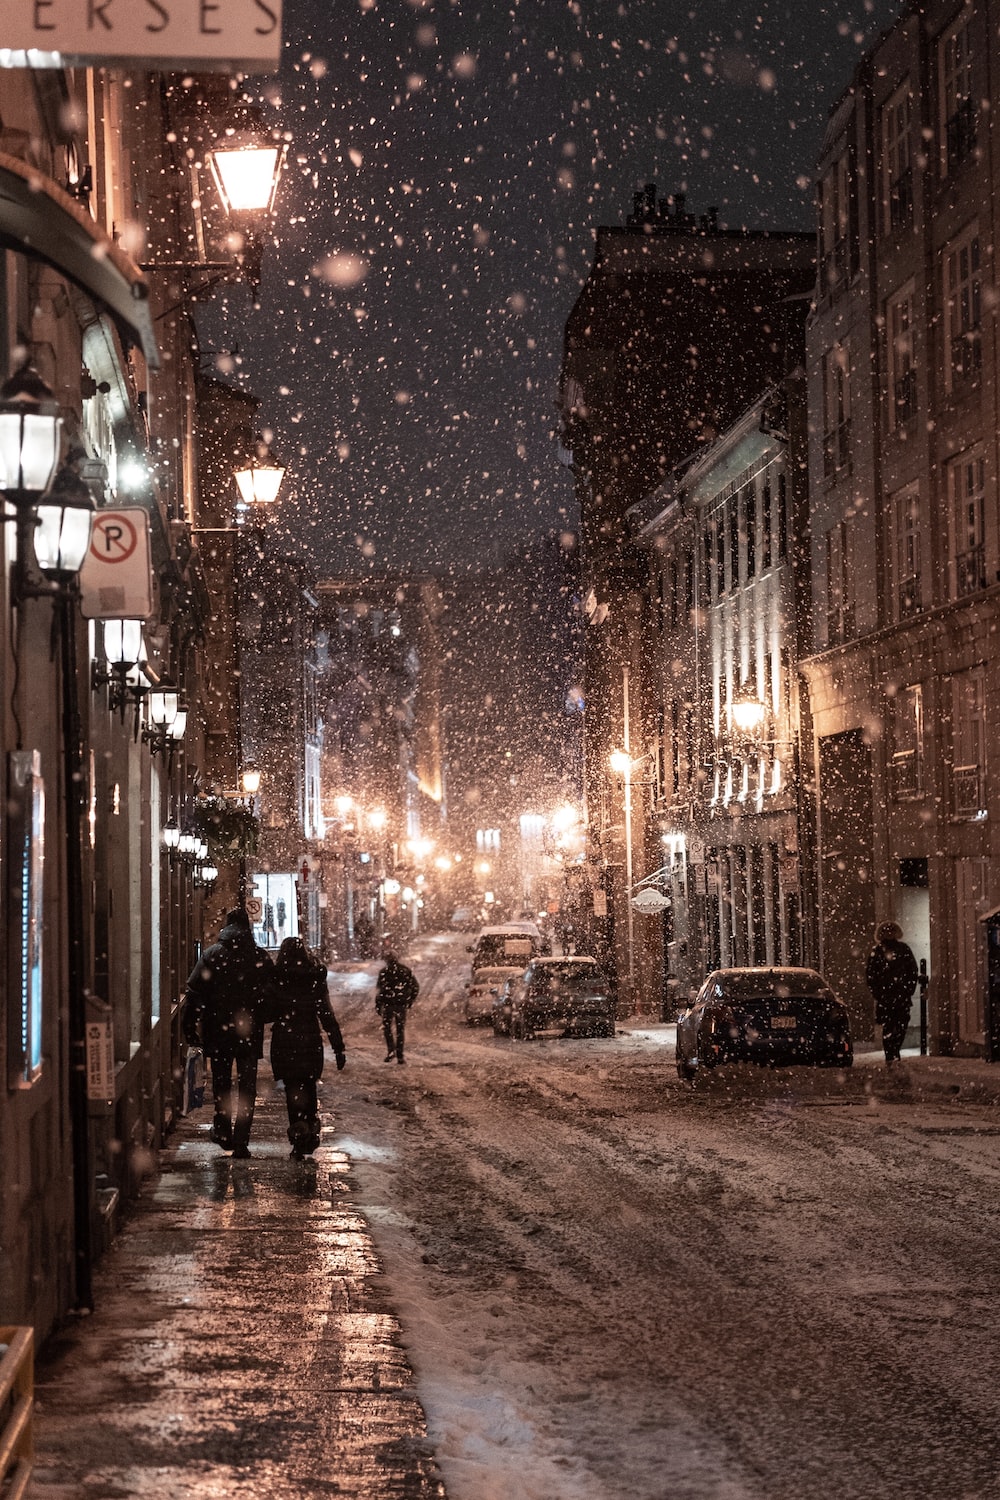 Best Snow Night Picture [HD]. Download Free Image